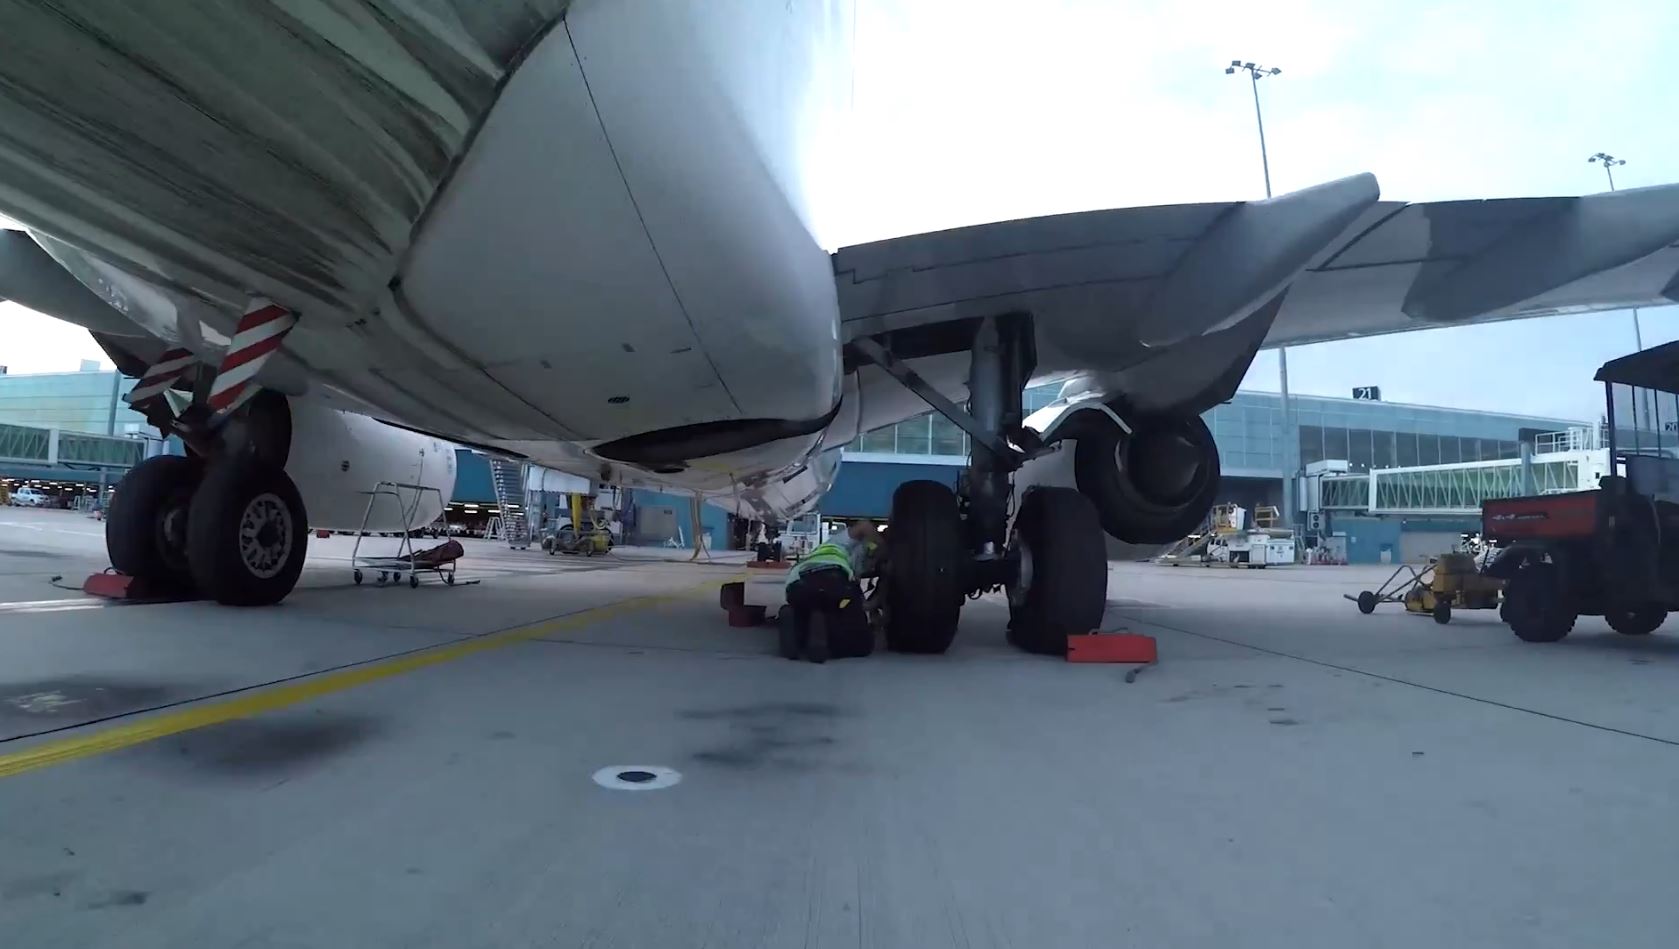 Qantas and GoPro: Day in the life of a plane